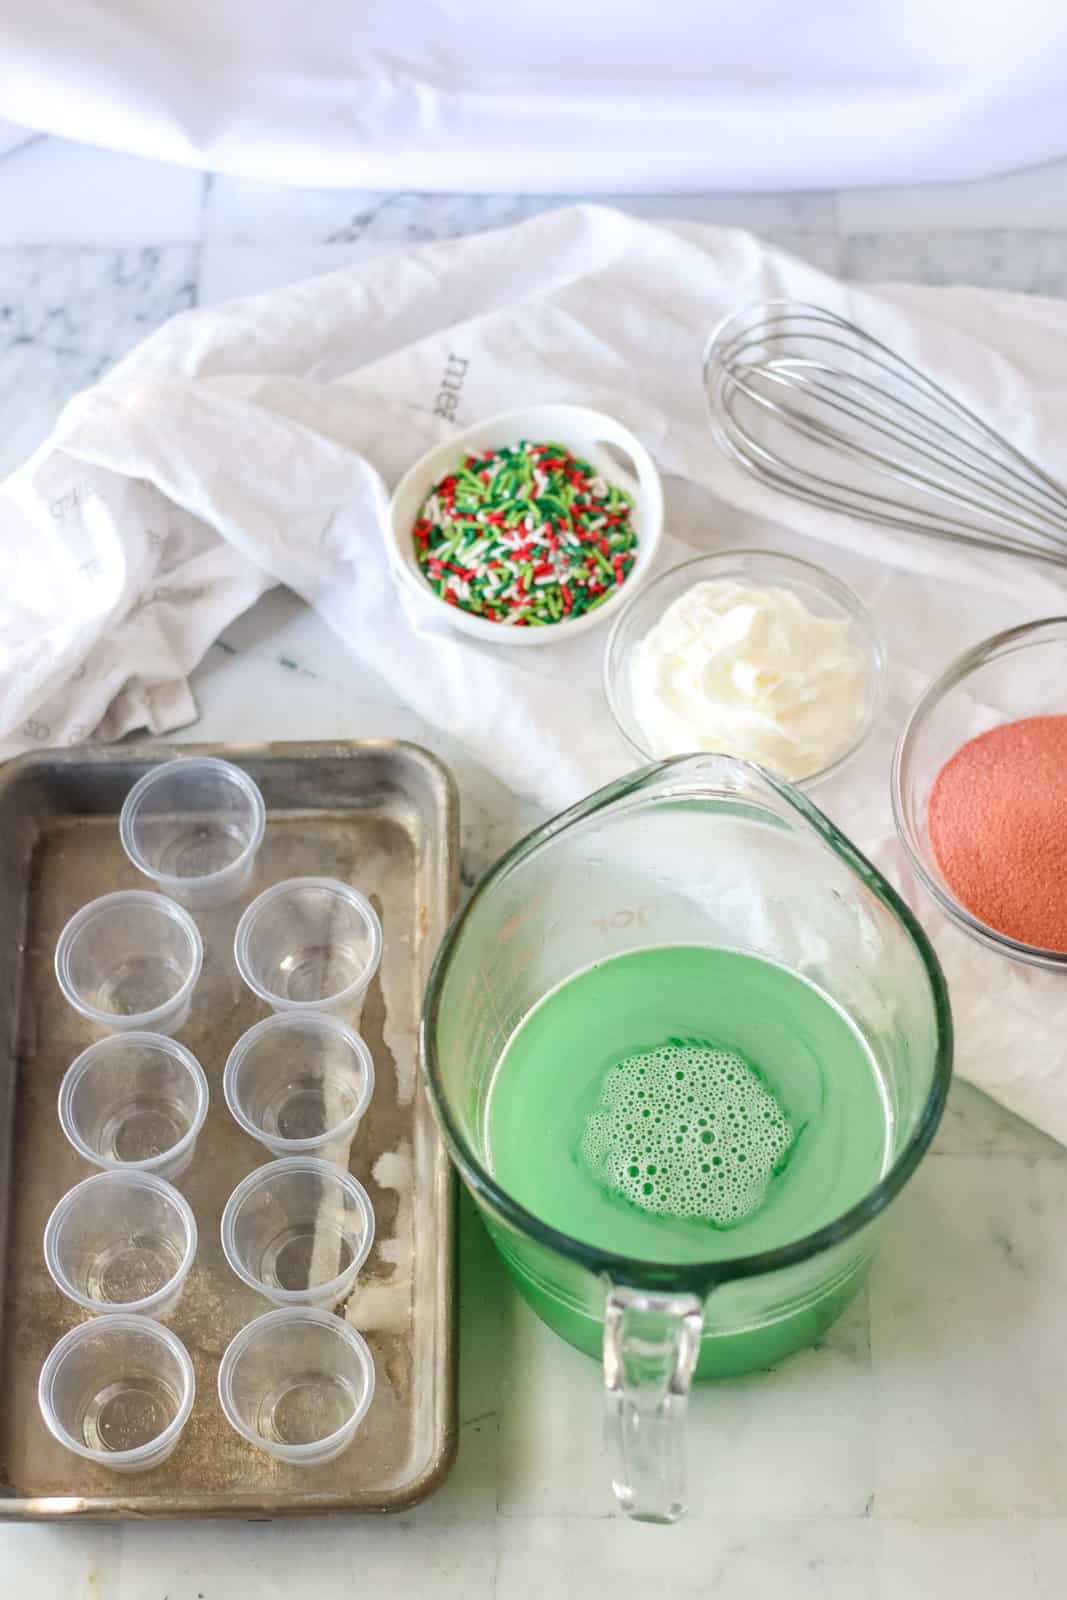 Green Jell-O mixture being prepared in large measuring cup.